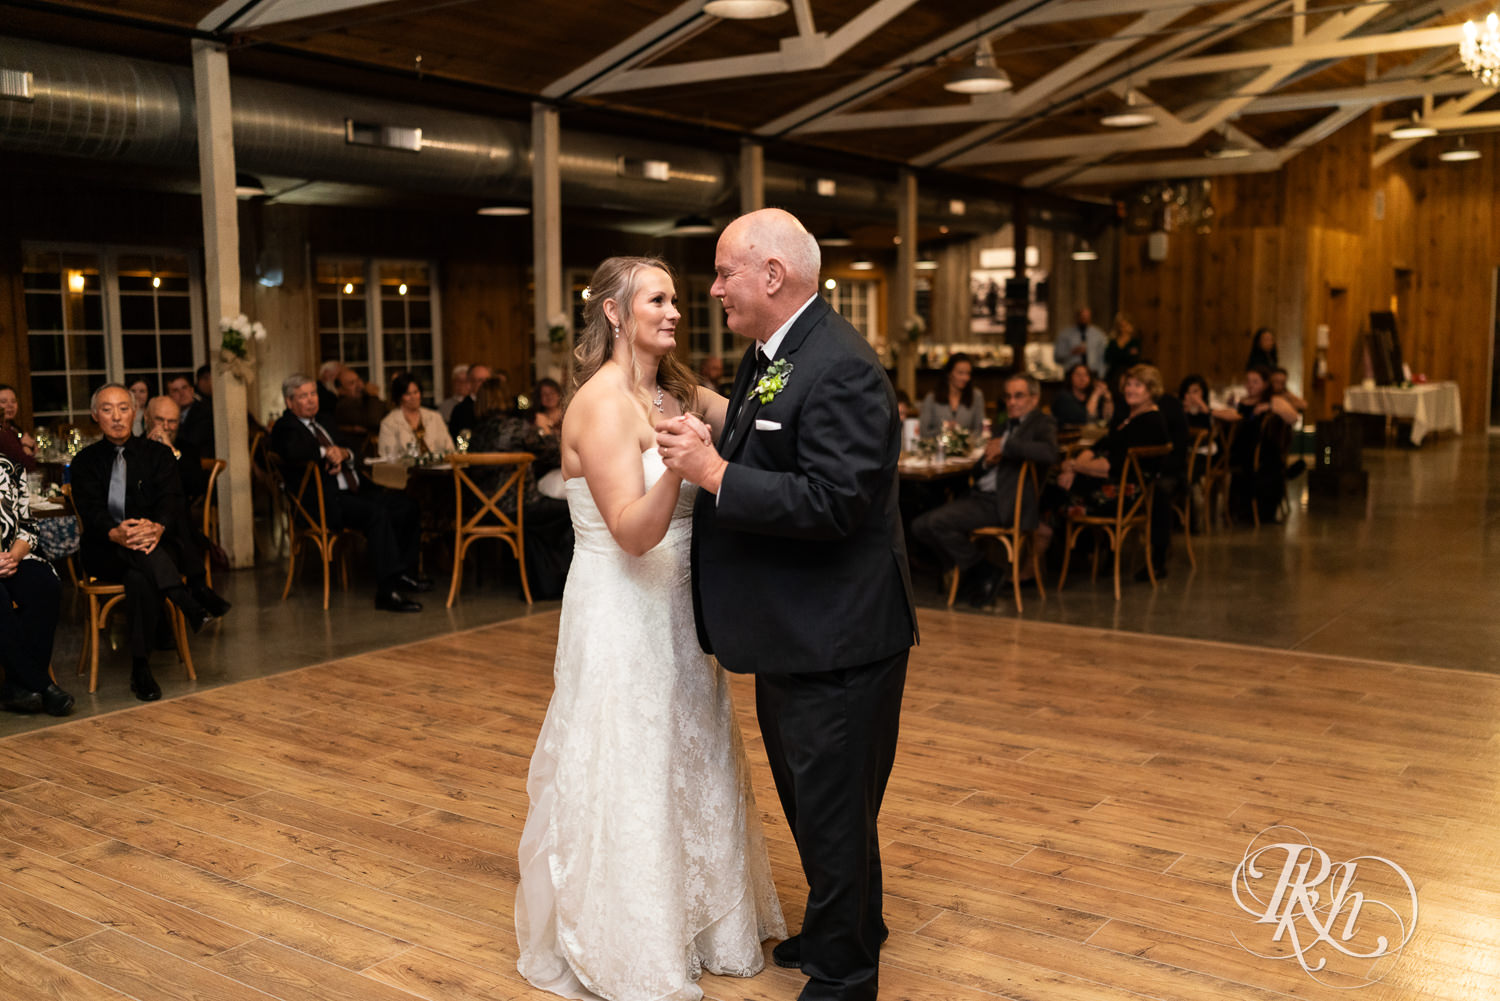 Bride and father dance at wedding reception at Almquist Farm in Hastings, Minnesota.